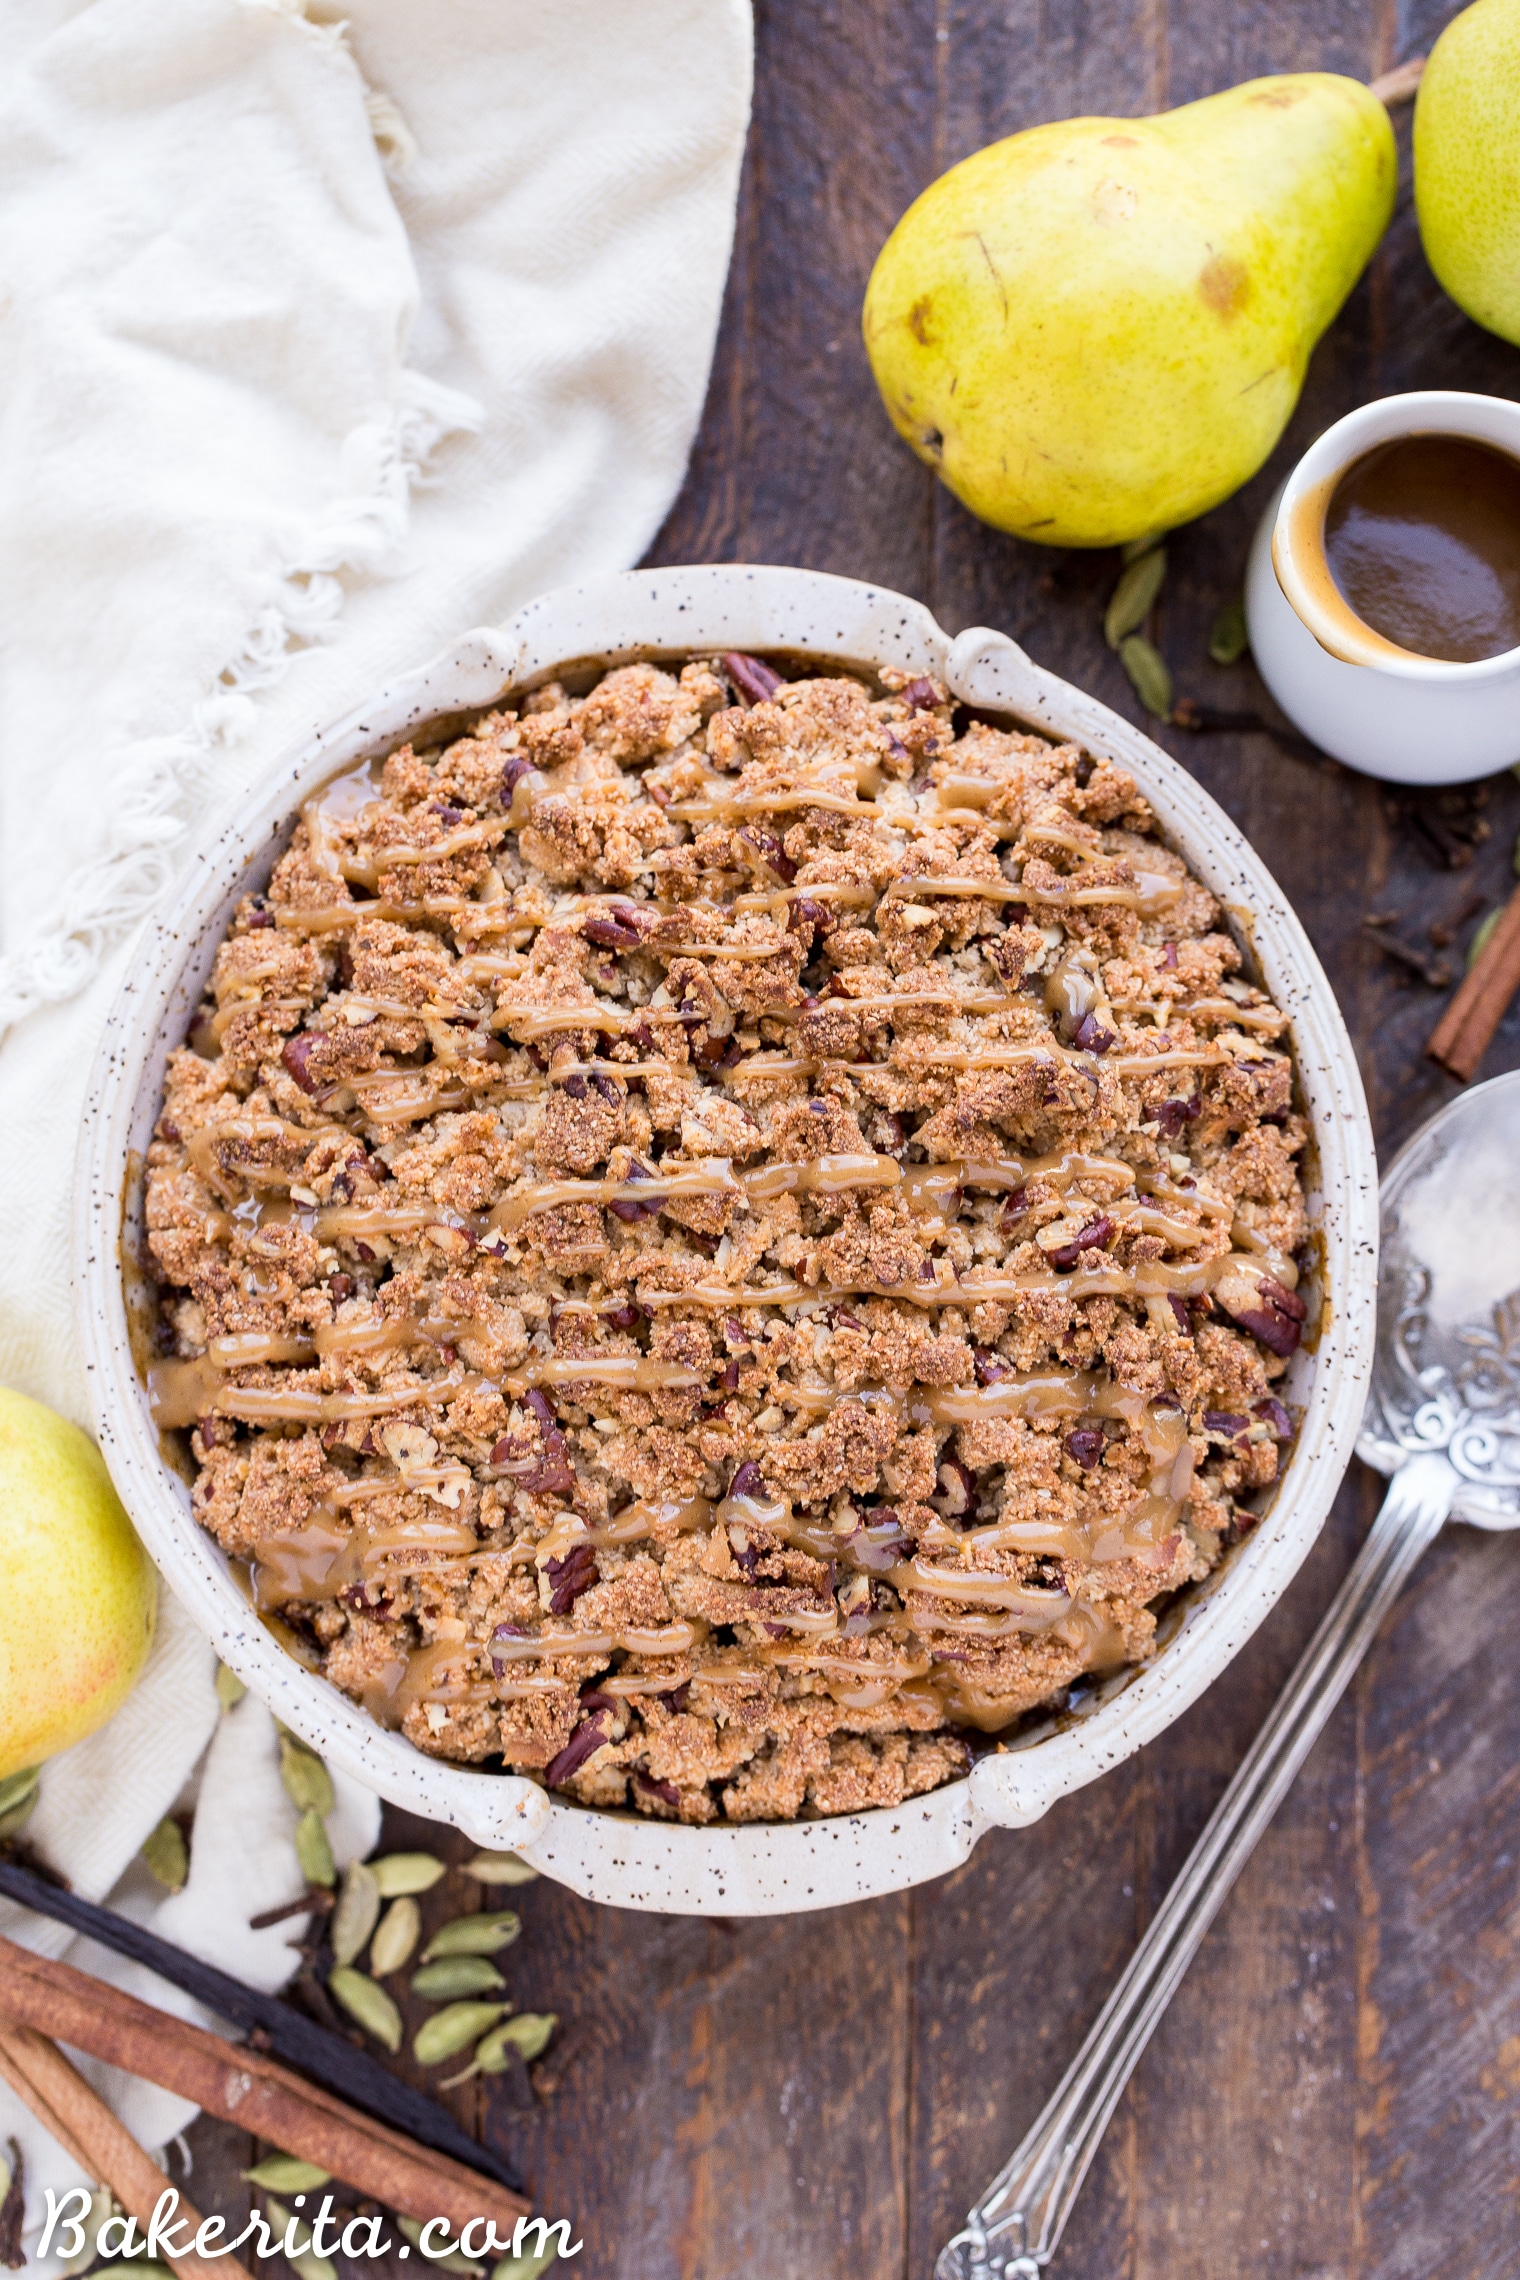 This Caramel Pear Crisp is a decadent and deliciously spiced dessert that's perfect for the holidays. The caramel pear filling is spiced with cinnamon, cardamom, cloves, and vanilla bean, and topped with a crunchy almond flour and pecan crisp topping. Don't forget to serve this gluten-free, paleo, and vegan crisp with some whipped coconut cream!